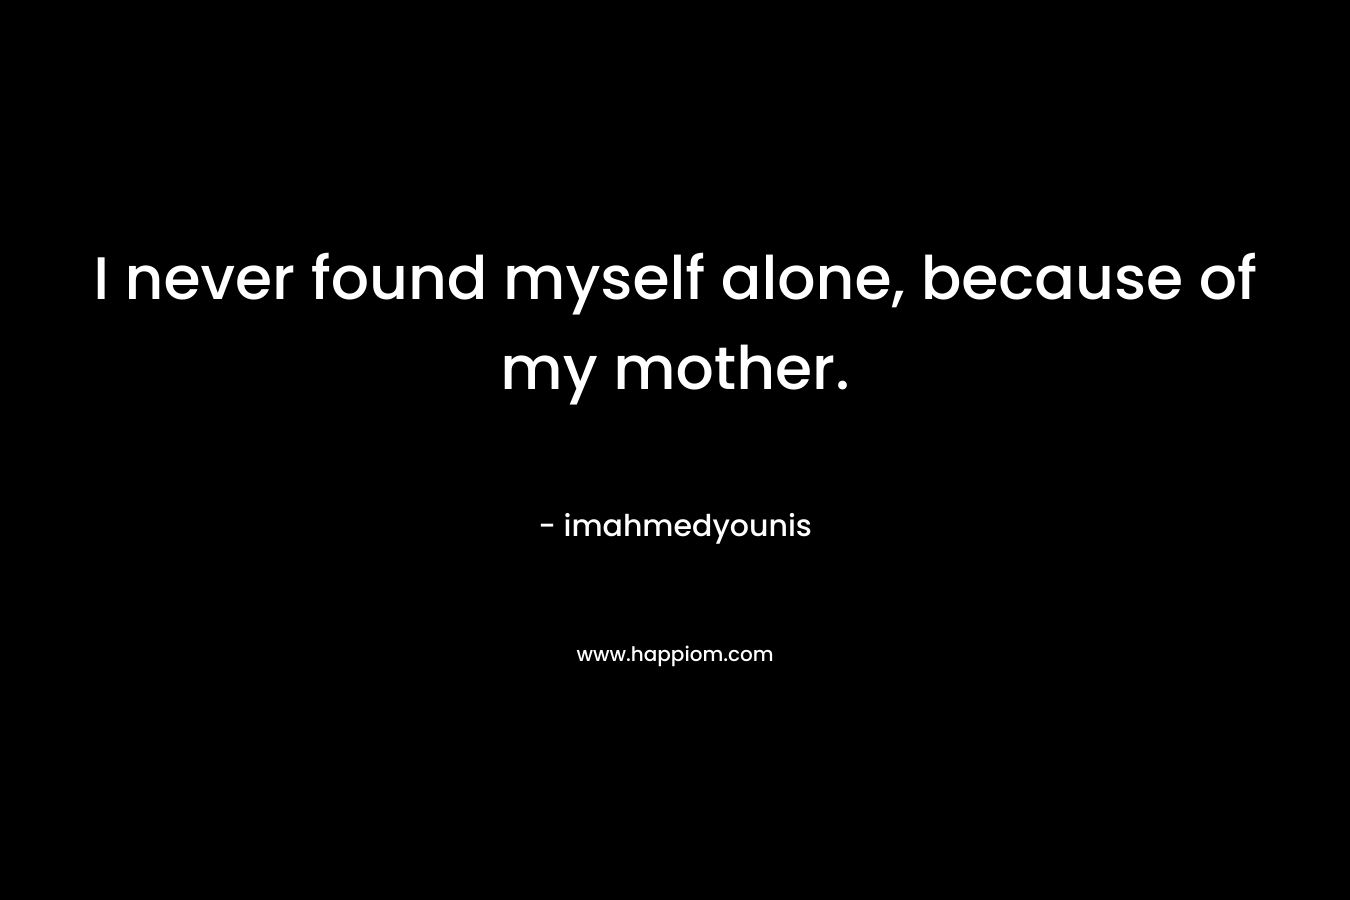 I never found myself alone, because of my mother.